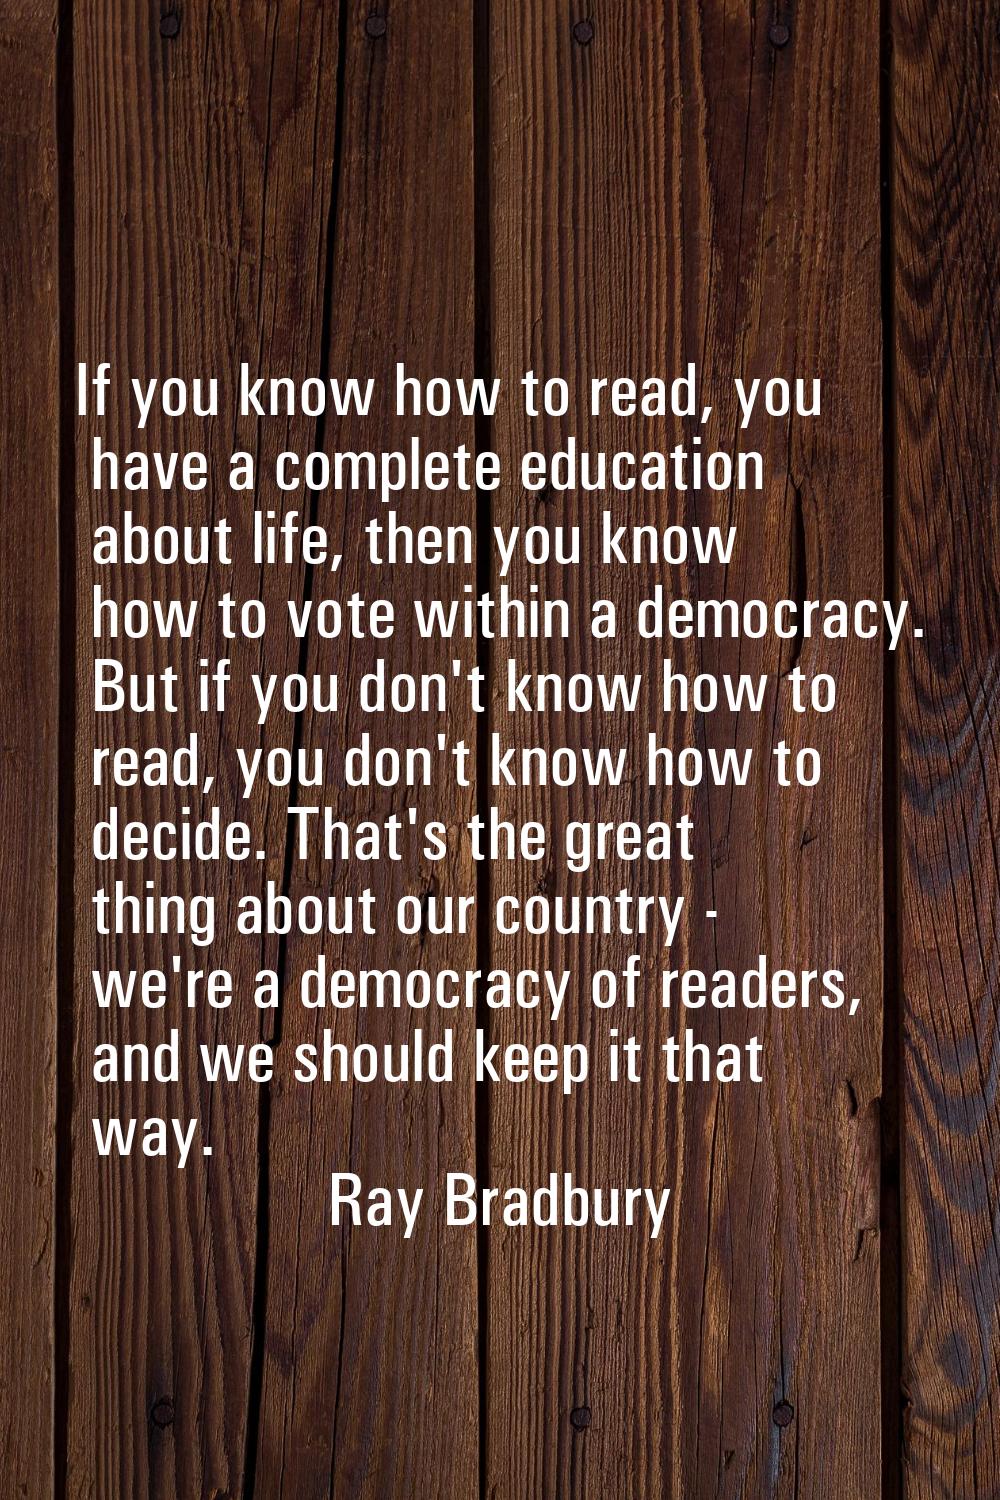 If you know how to read, you have a complete education about life, then you know how to vote within